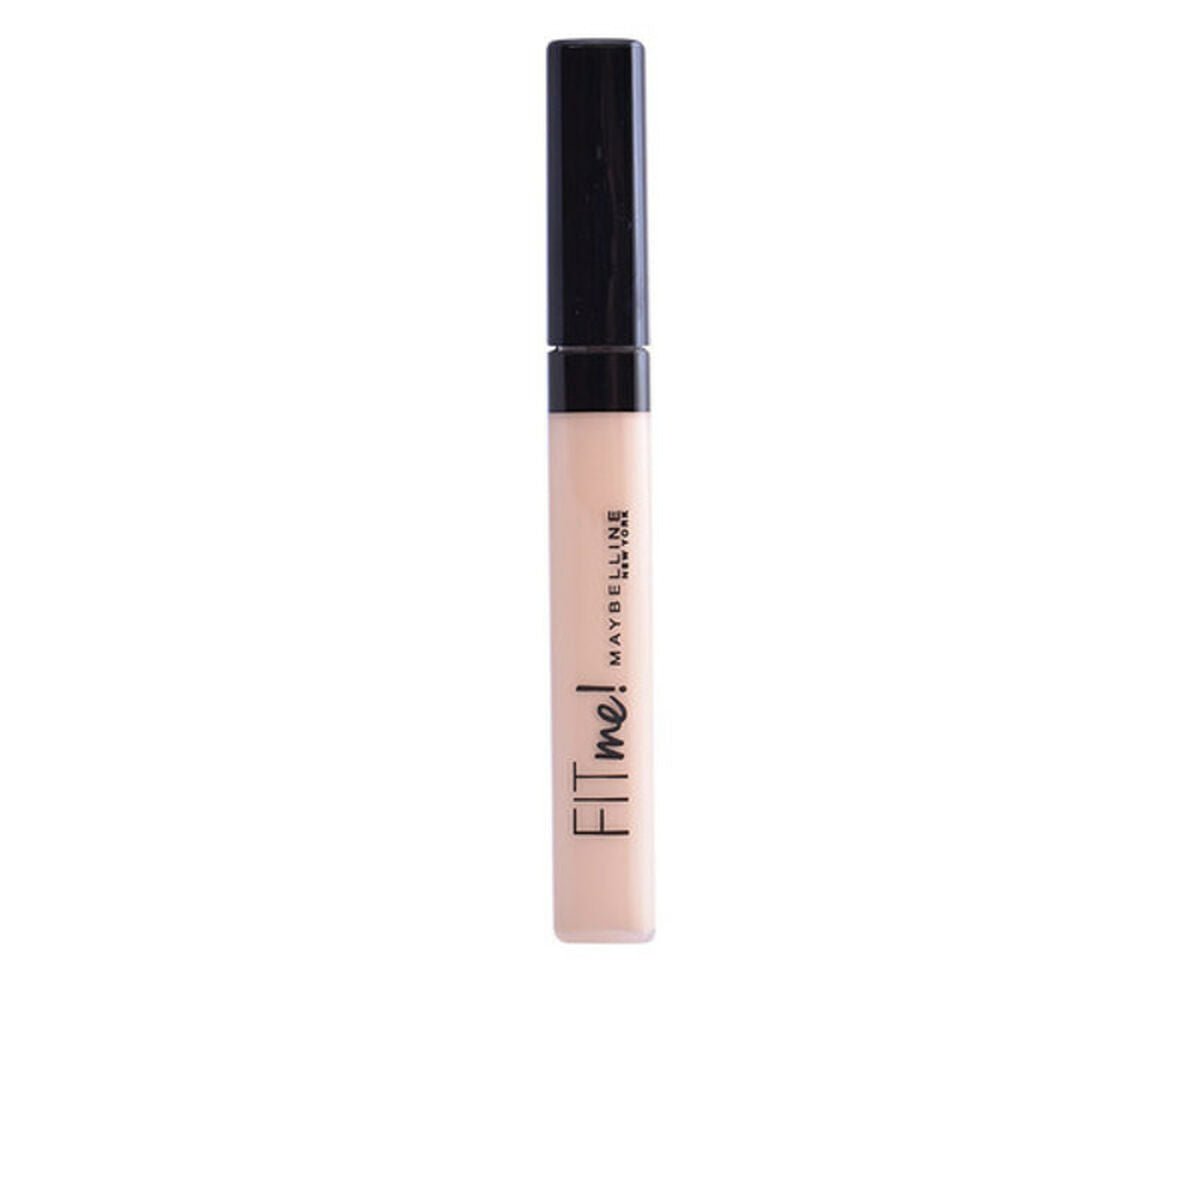 Facial Corrector Fit Me Maybelline - JOSEPH BEAUTY